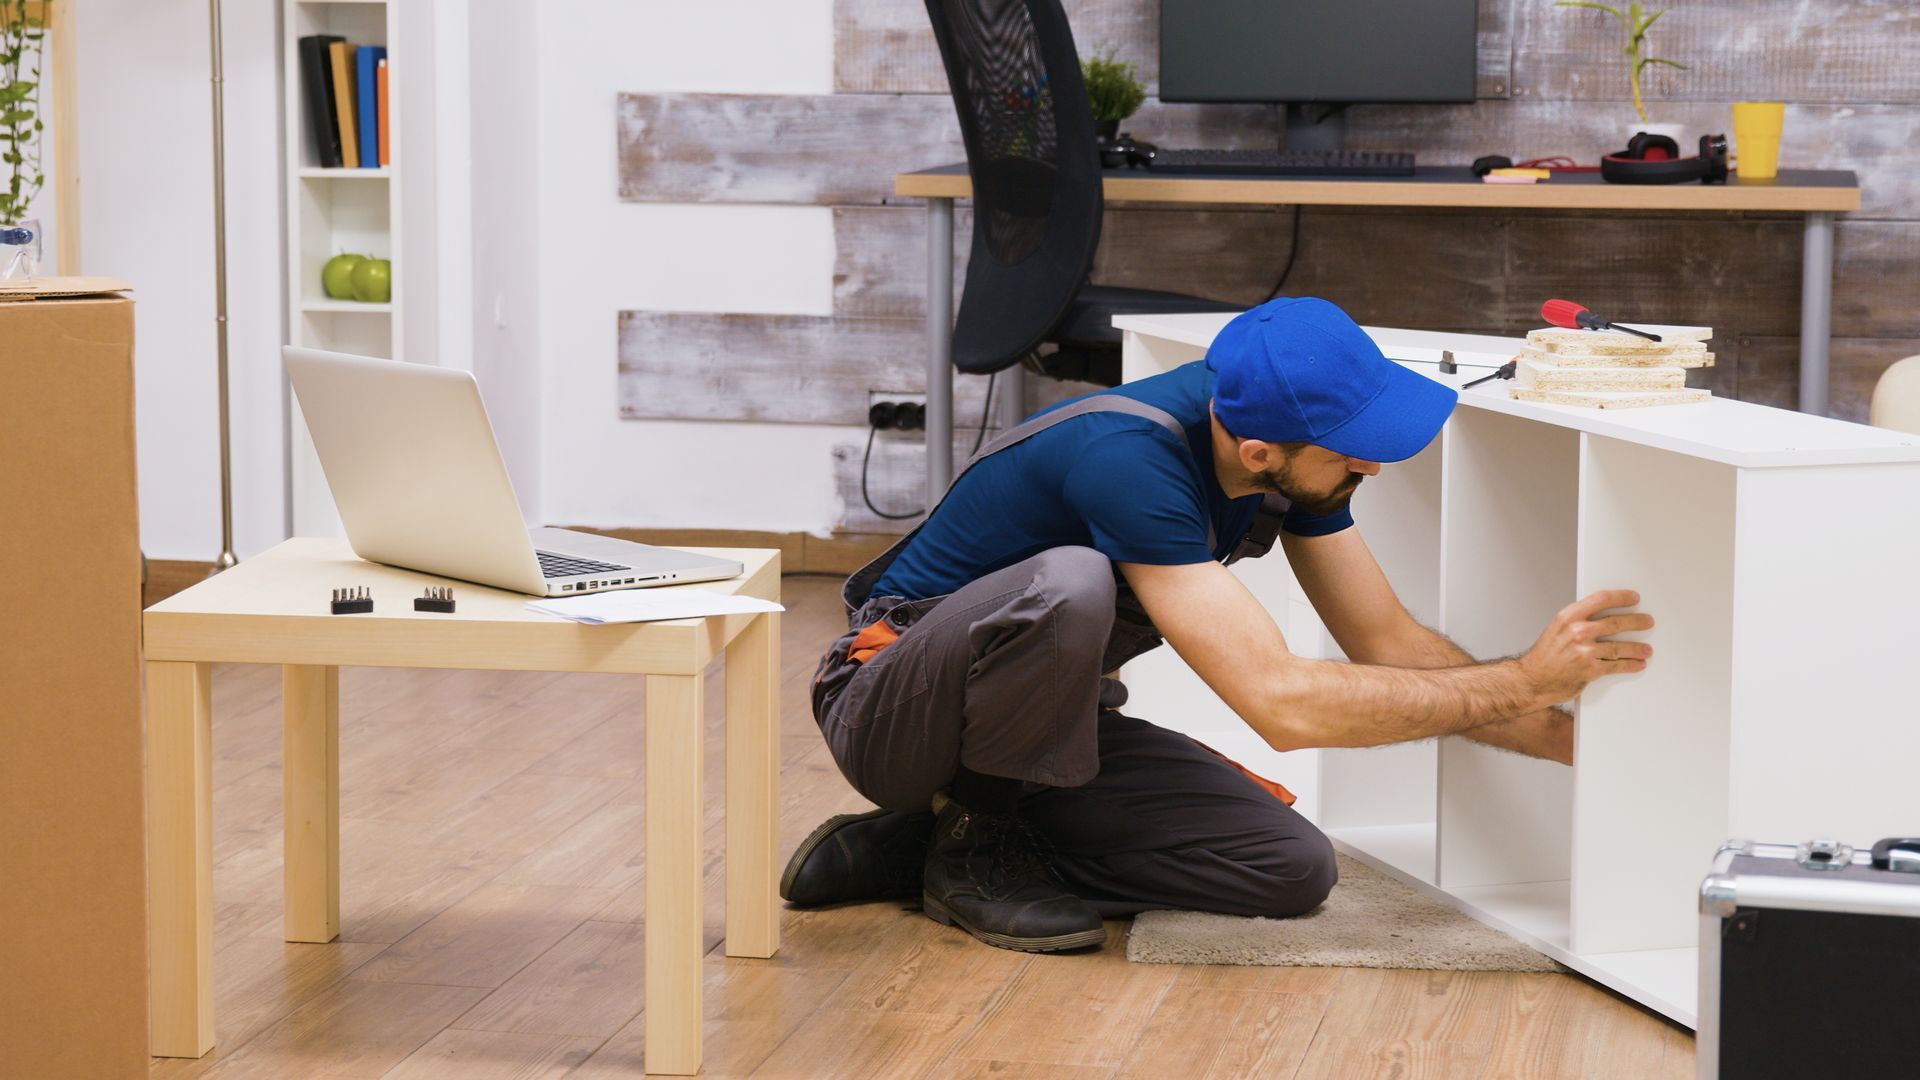 a man is kneeling down to install a bookshelf in a living room .